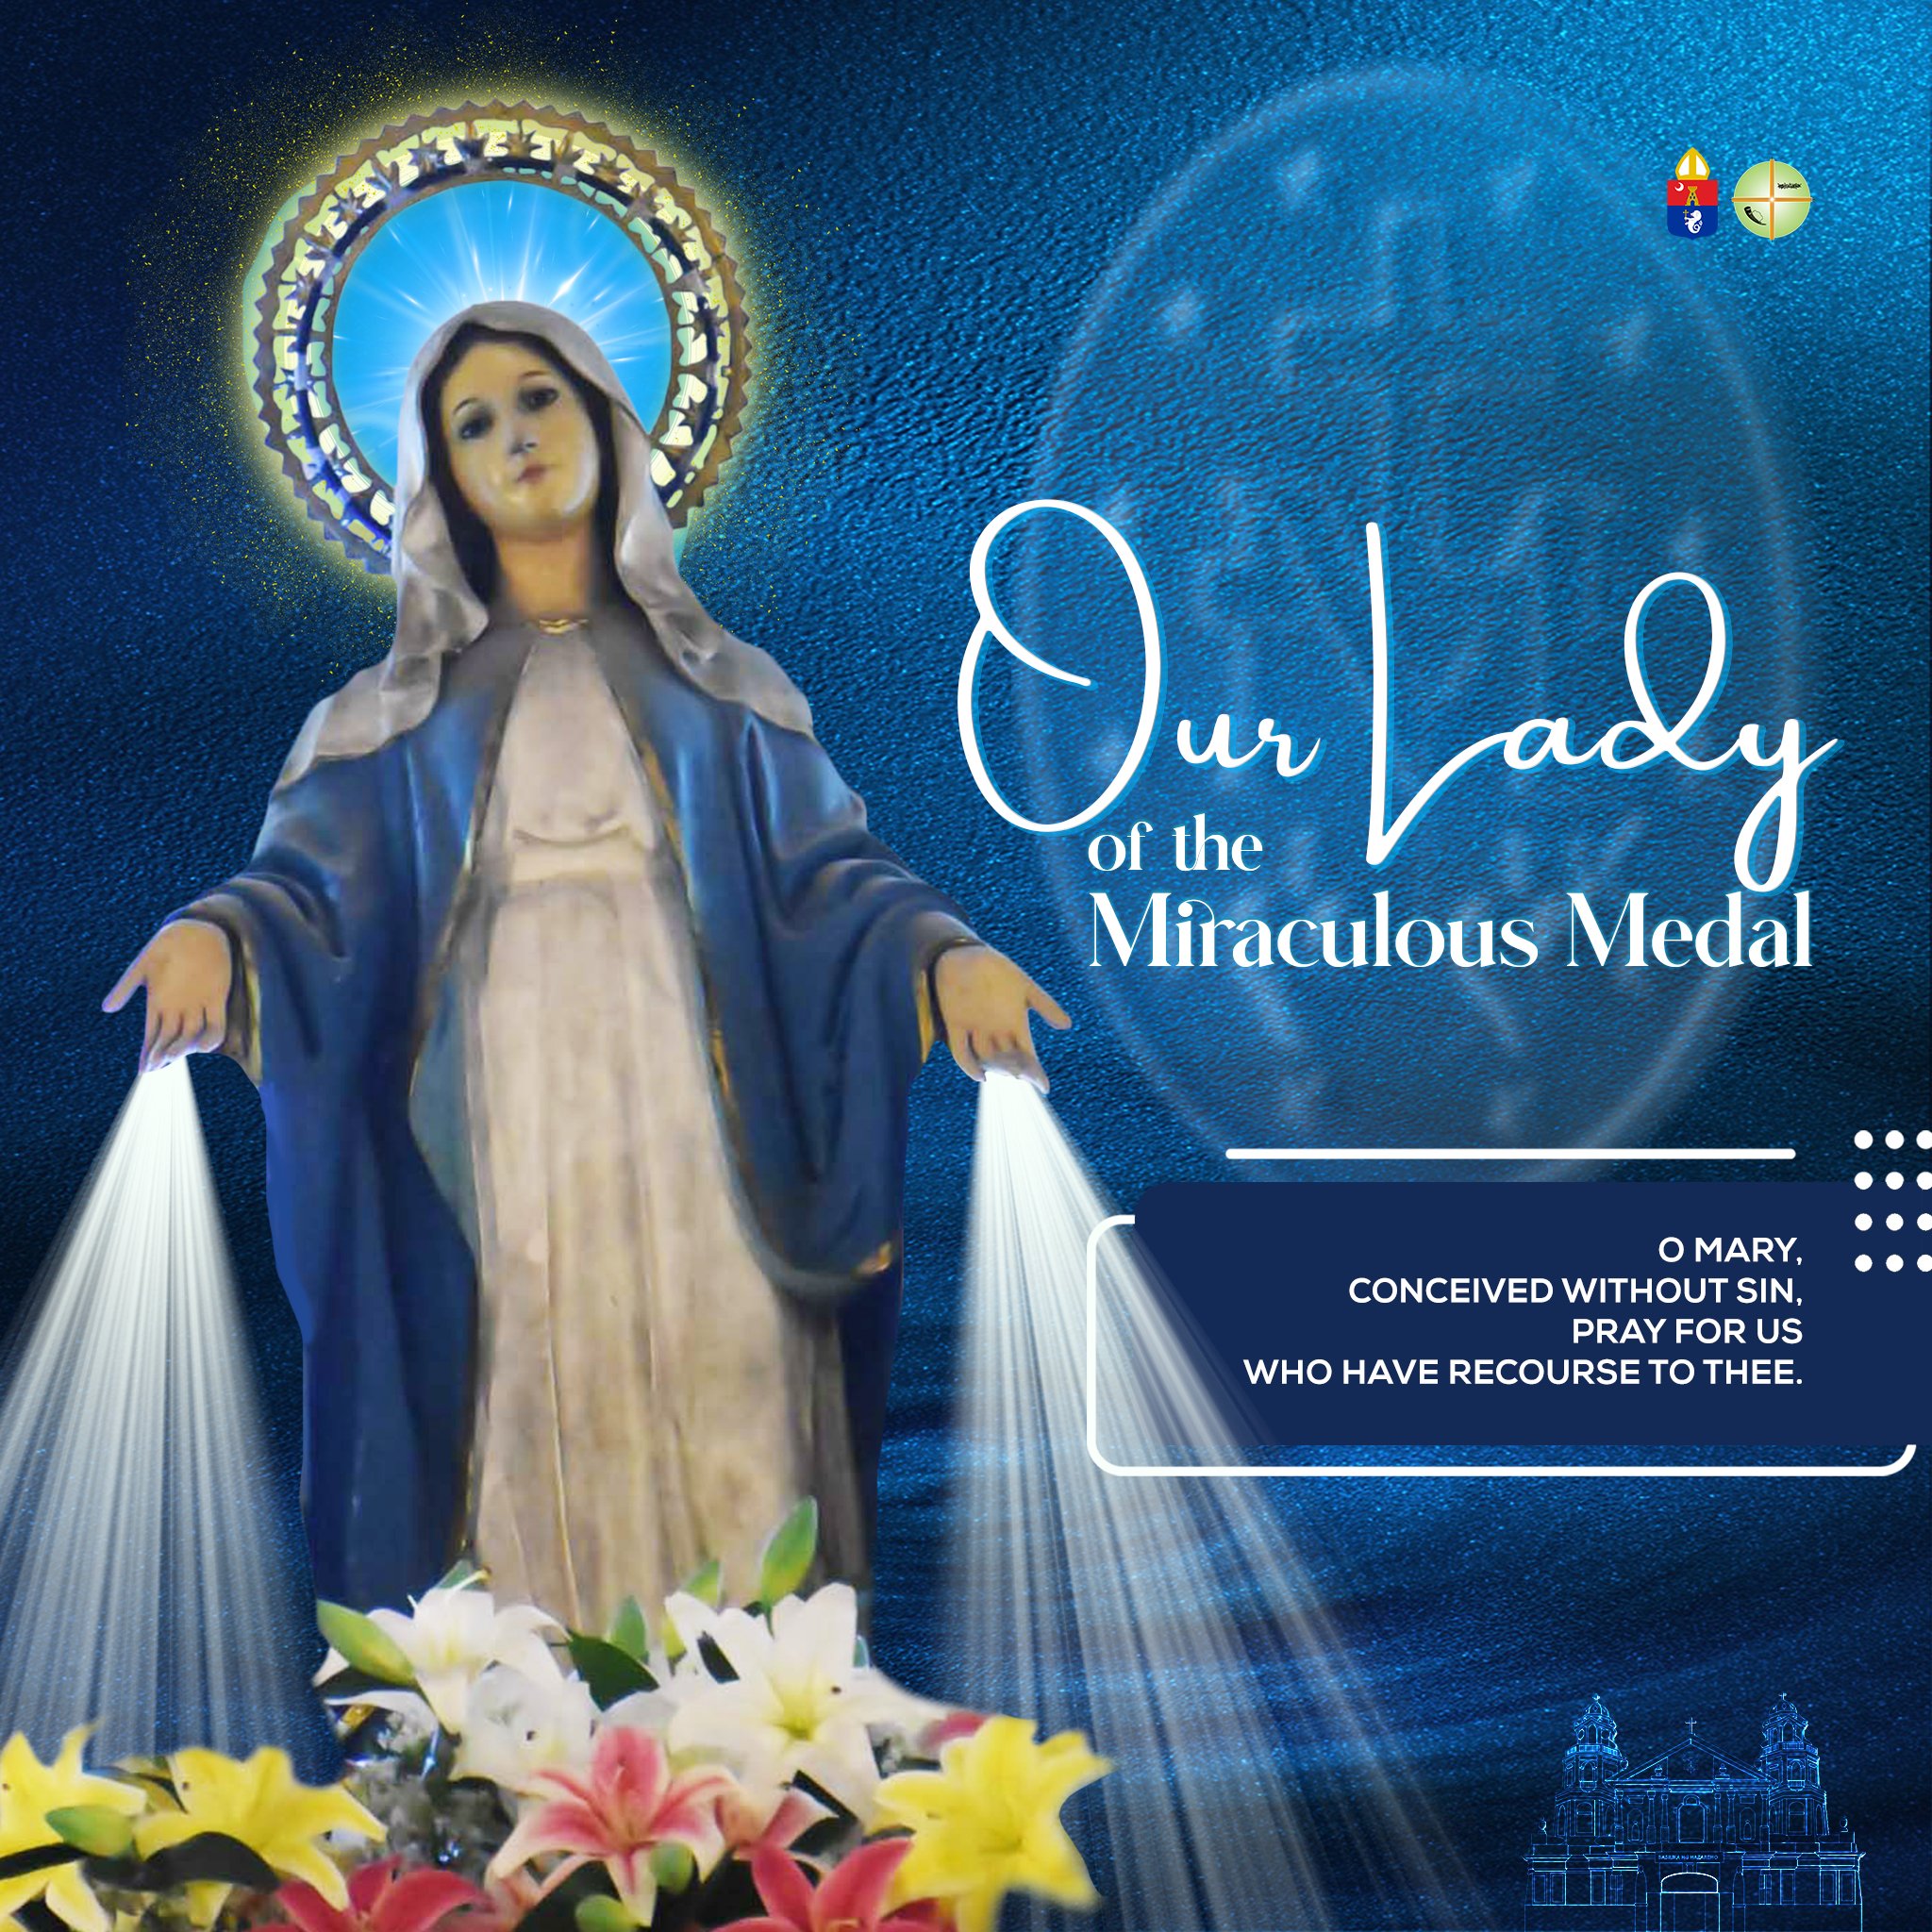 Feast of Our Lady of the Miraculous Medal